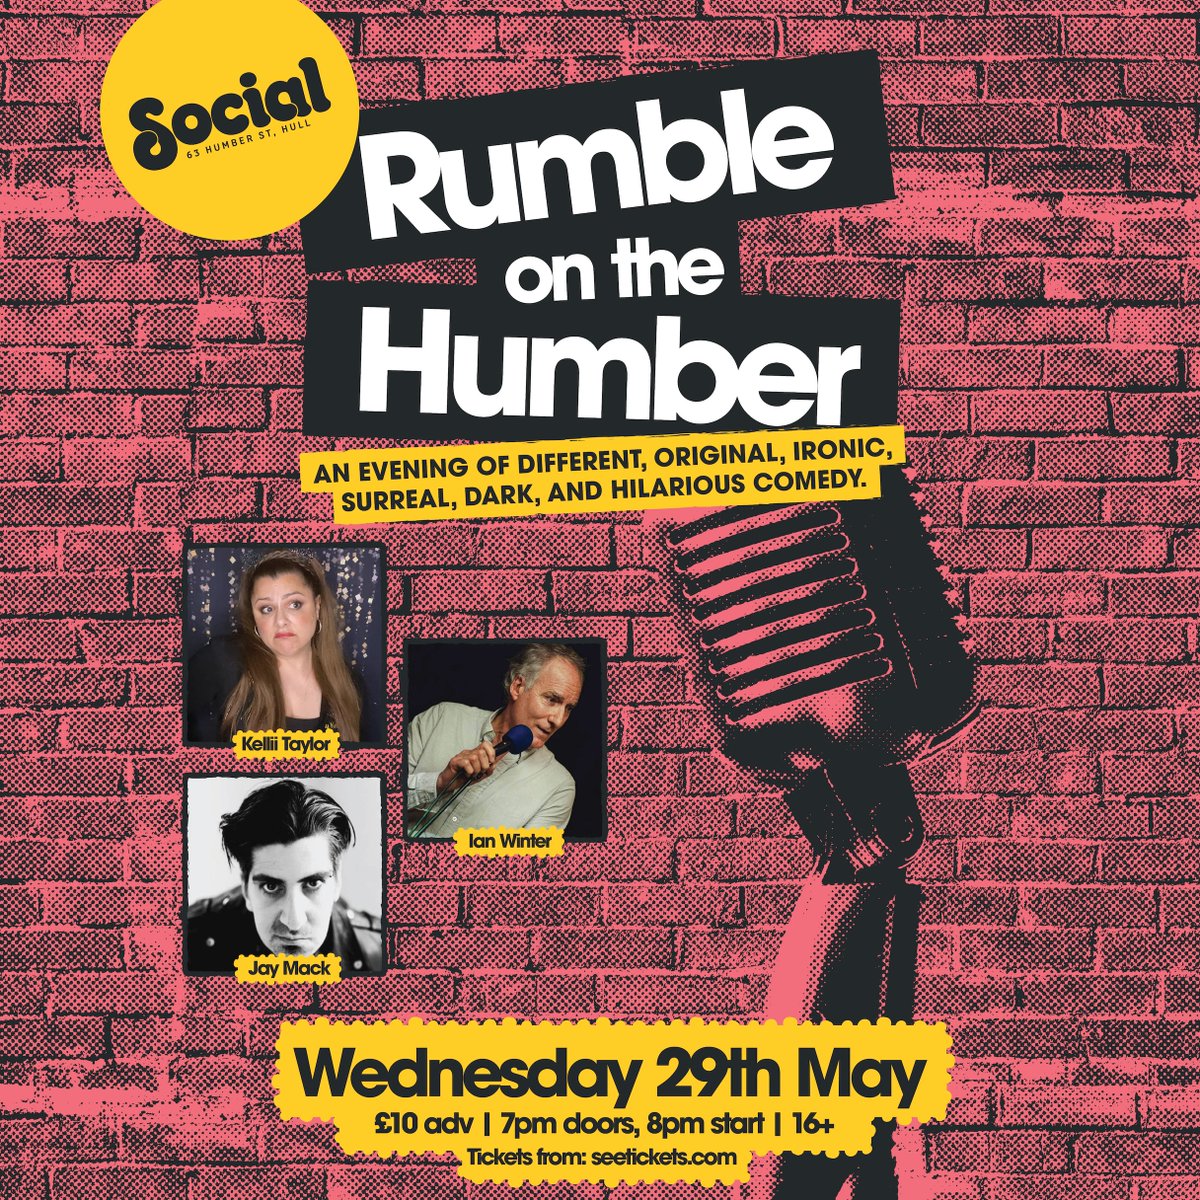 2️⃣ WEEKS TO GO Join us for an evening of different, original, ironic, surreal, dark, and hilarious comedy, as three stand-up heavyweights duke it out at The Rumble On The Humber. 📅 Wednesday 29th May 🎟 book tickets: bit.ly/RumbleOnHumber